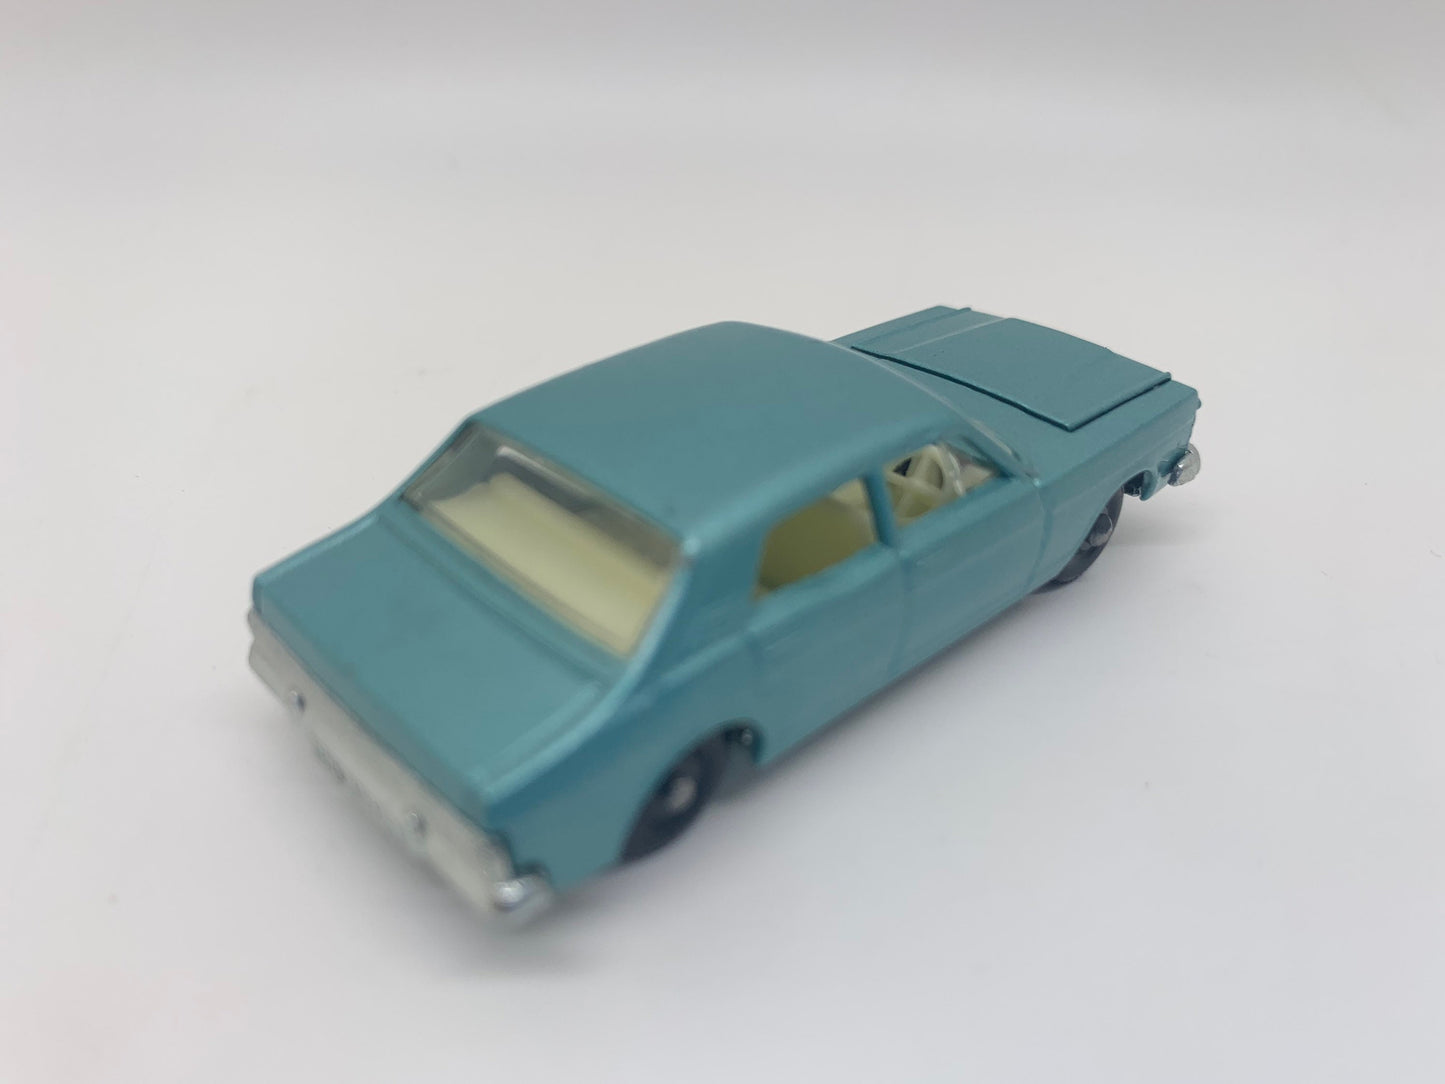 Matchbox 1968 Ford Zodiac Mark IV Blue Miniature Collectable Scale Model Toy Car Perfect Birthday Gift